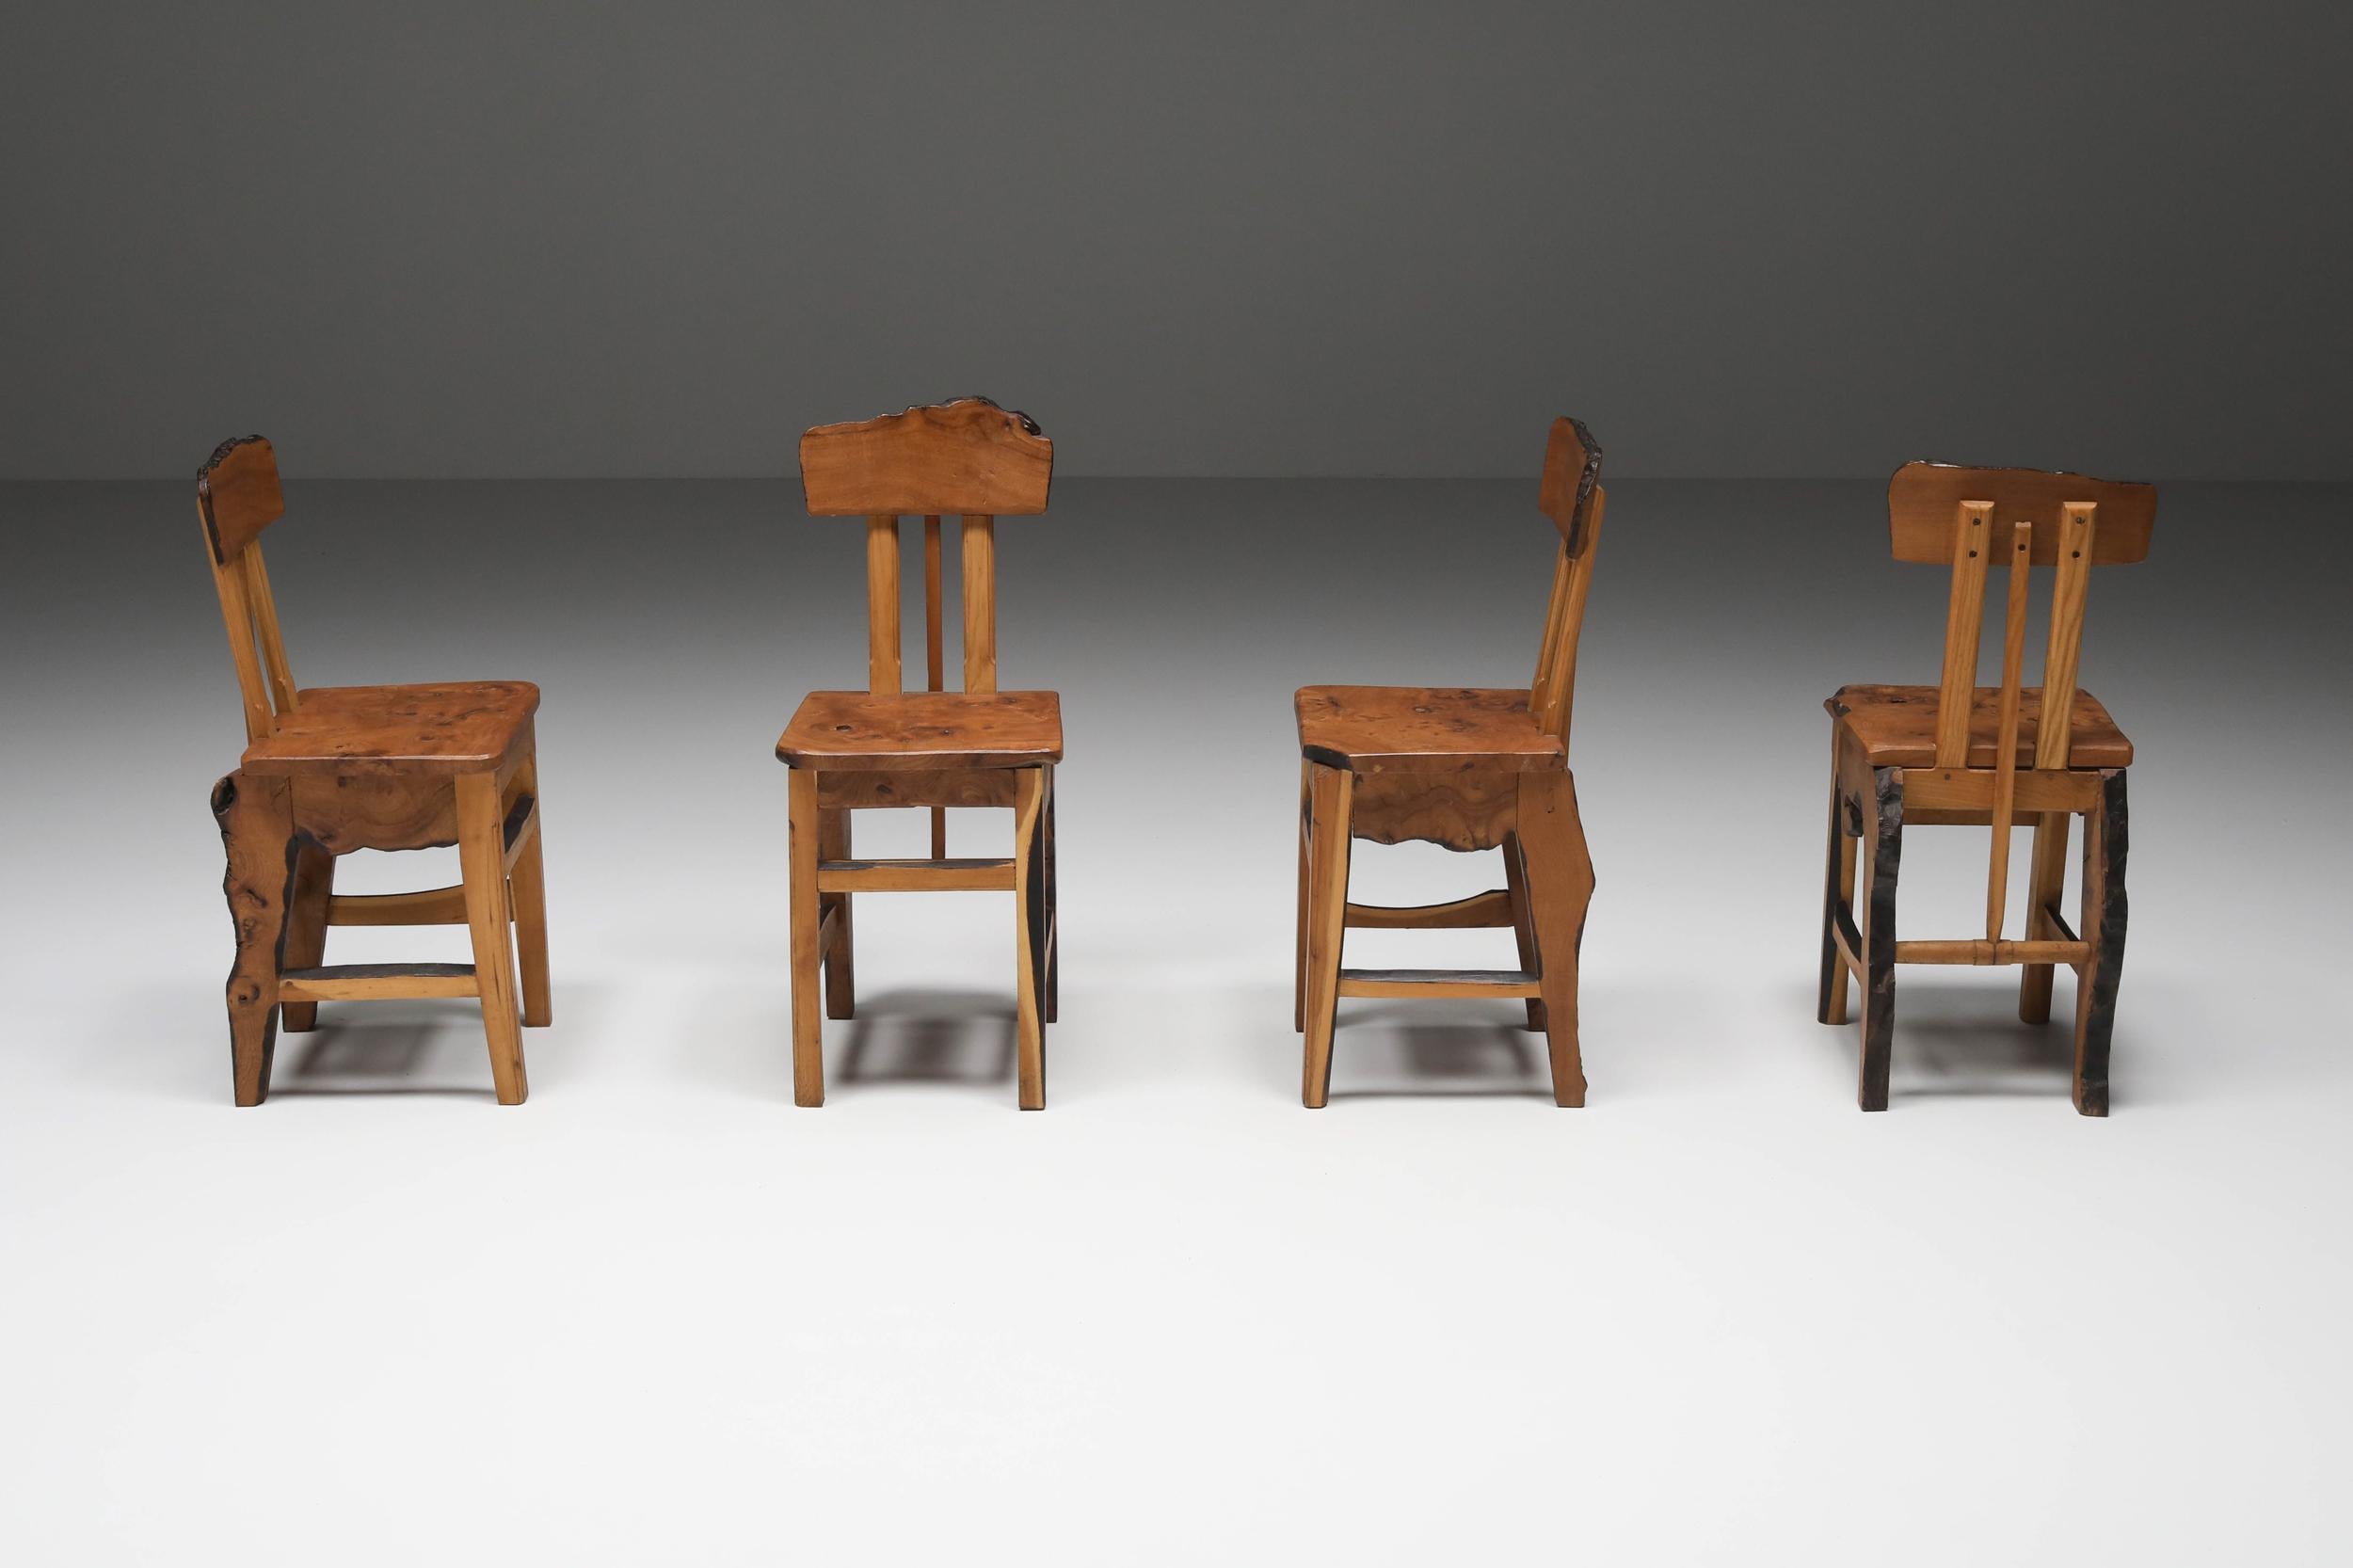 Wabi-Sabi; Elm; Wooden dining chairs; Dining chairs; Side Chairs; Atelier Marolles; Axel Vervoordt; Japanese Inspired; 1960's;

A unique set of six dining chairs in French elm custom-designed in an Atelier Français in the 1960s. The artisanal